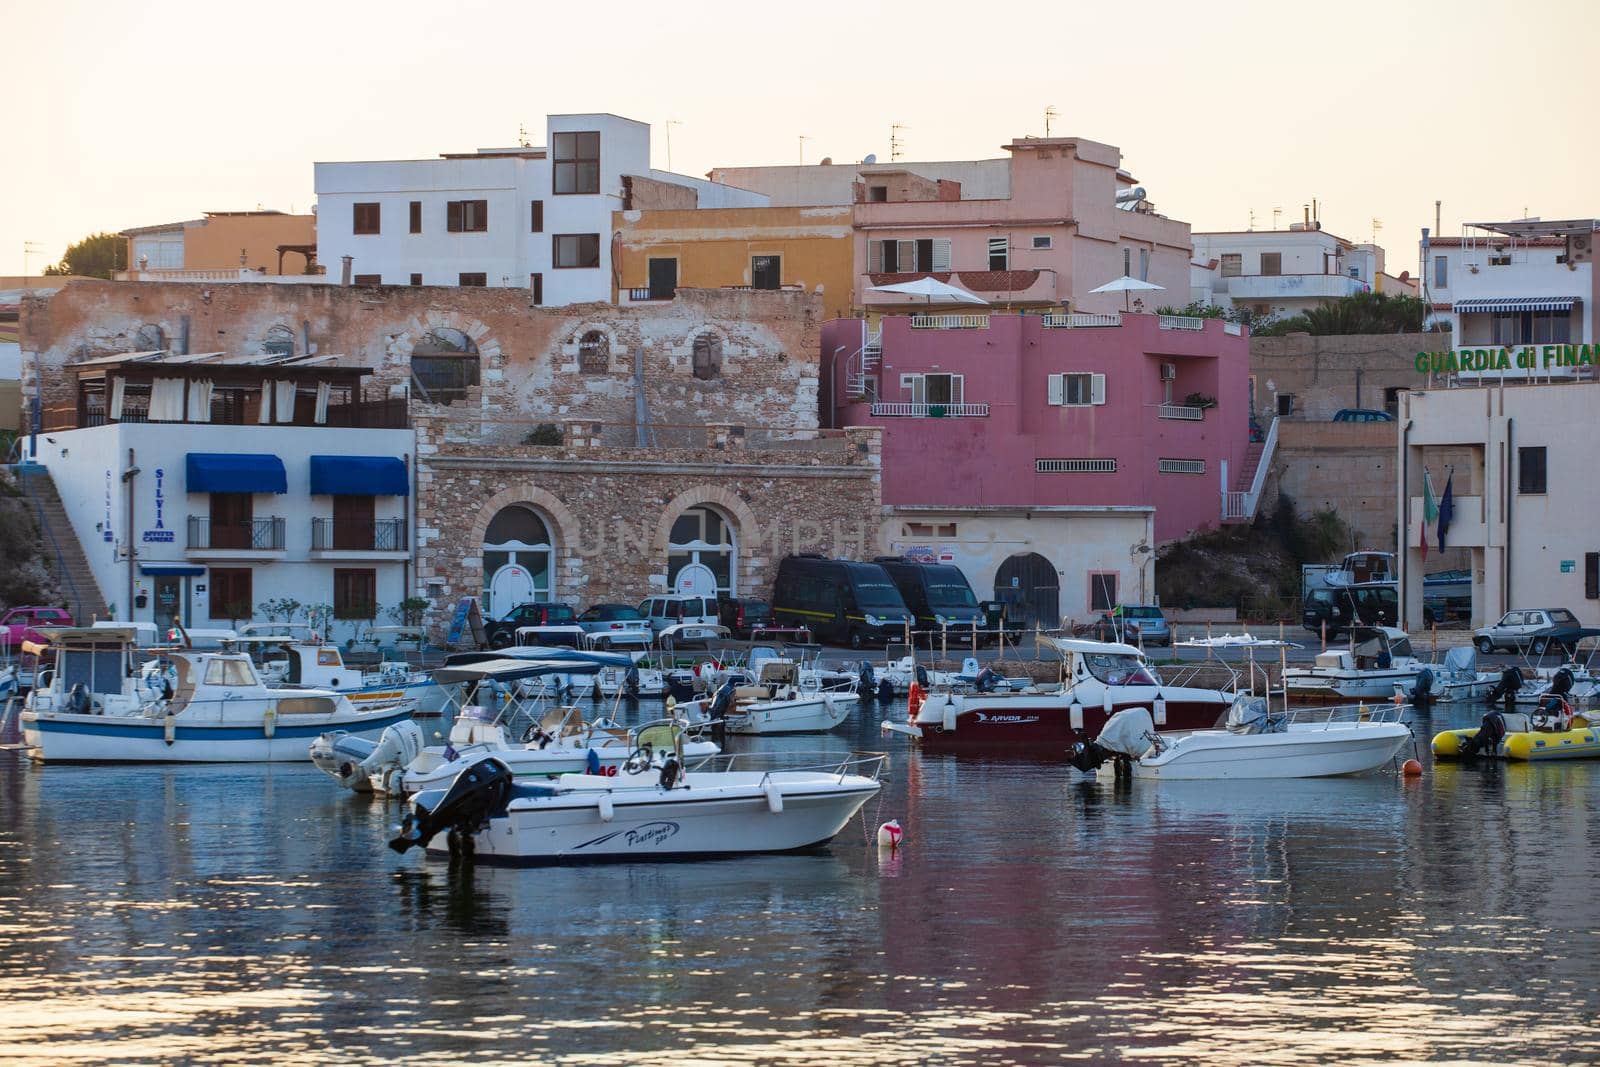 LAMPEDUSA, ITALY - AUGUST, 01: View of the old town of Lampedusa at sunset on August 01, 2018